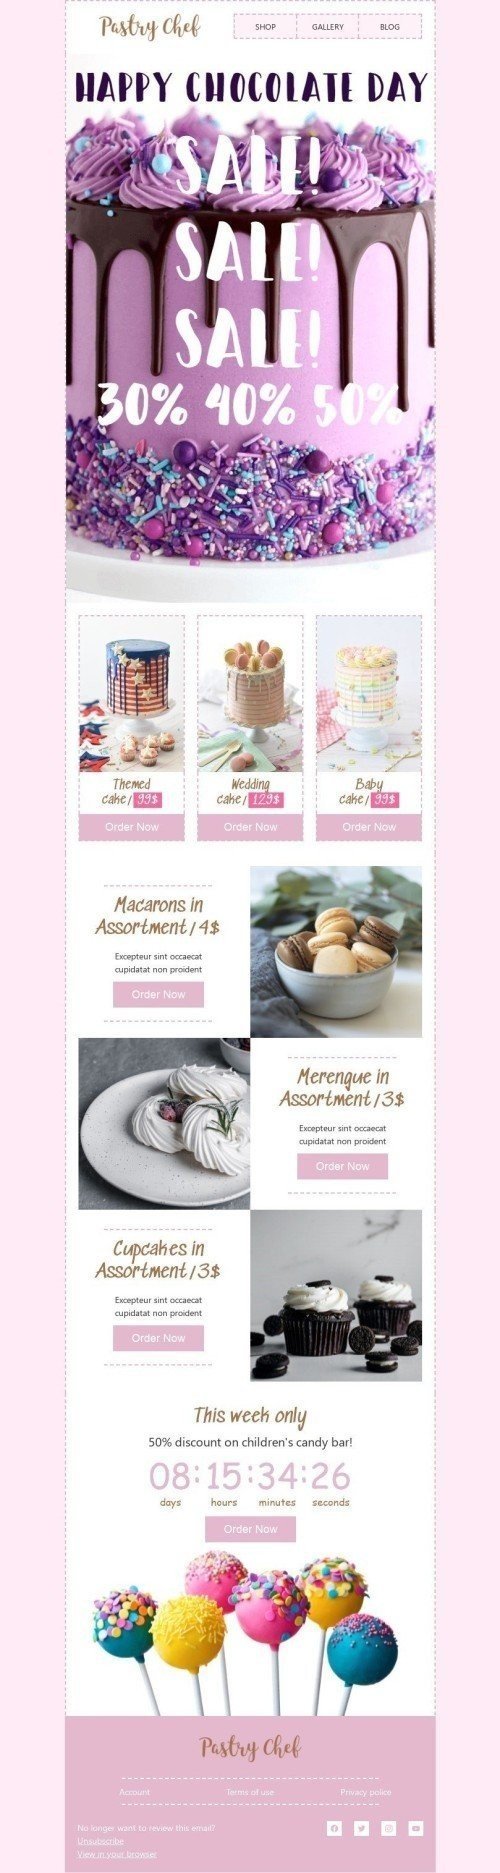 International Chocolate Day Email Template «Children's candy bar» for Food industry desktop view